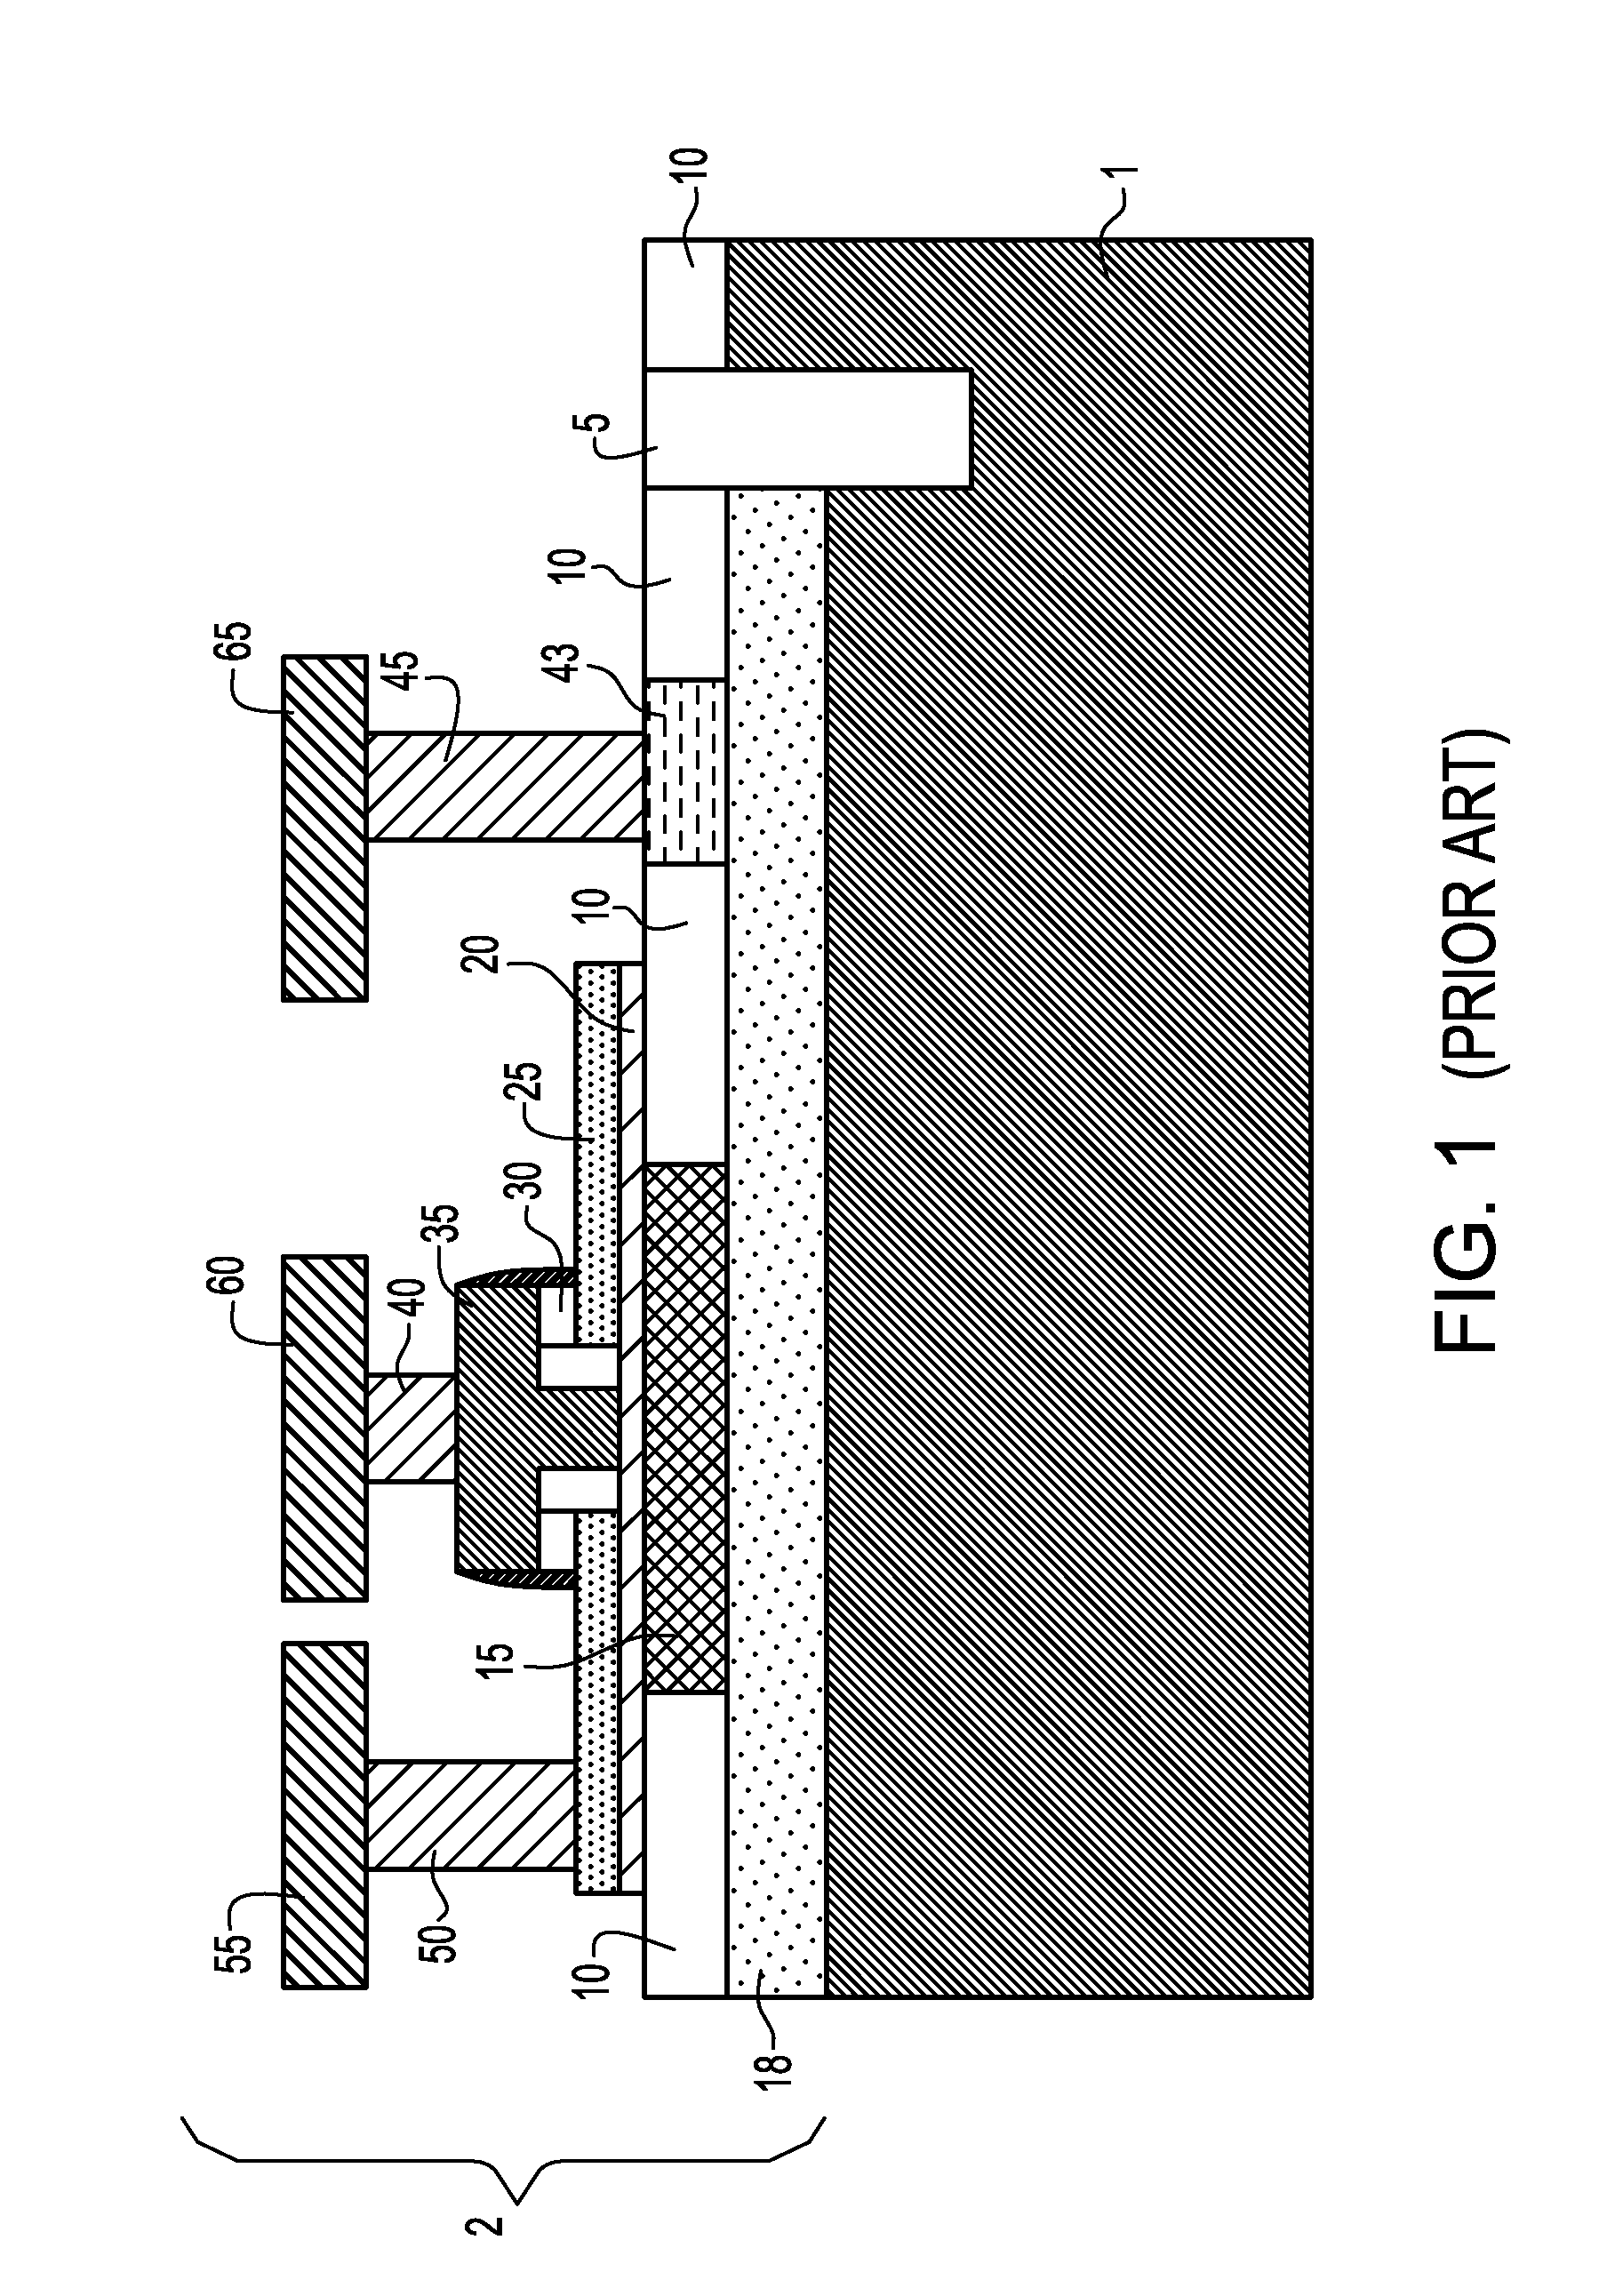 Semiconductor device structures with backside contacts for improved heat dissipation and reduced parasitic resistance